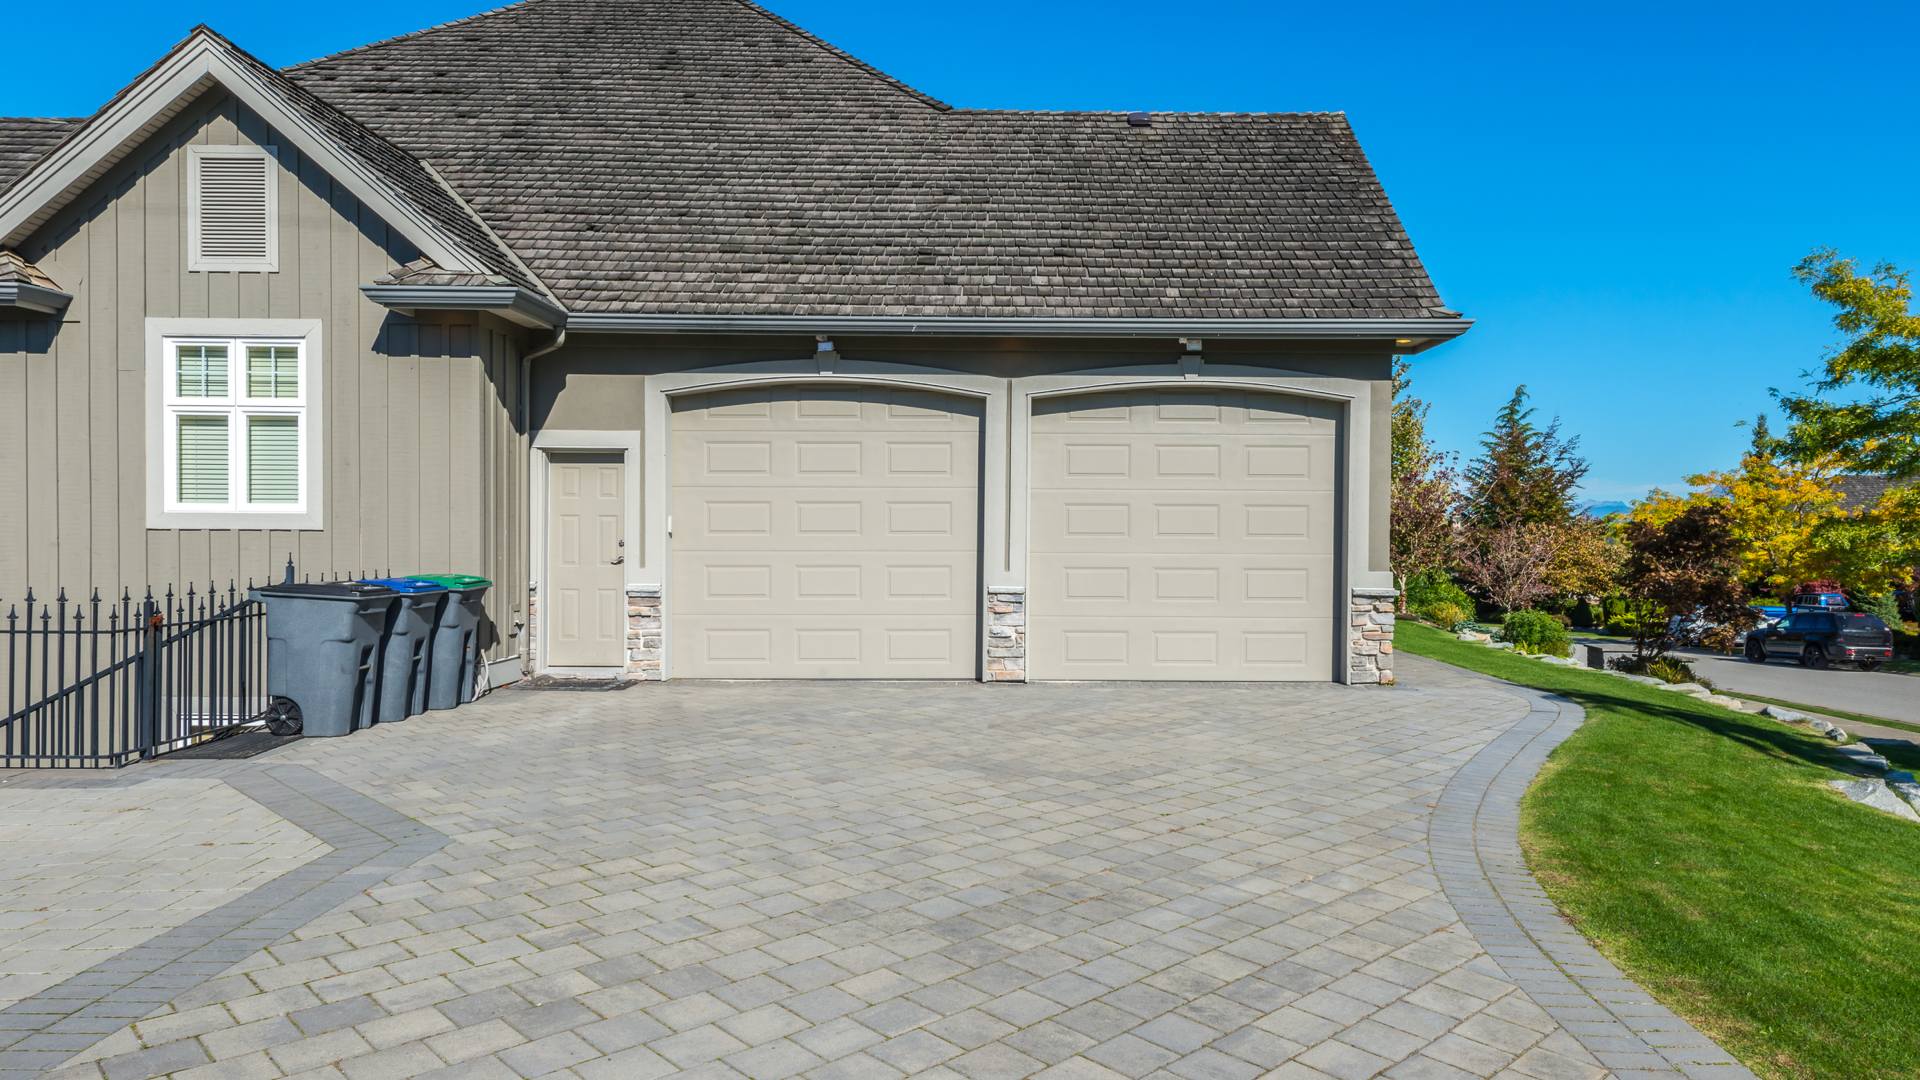 Driveway installed for clients in Urbandale, IA.